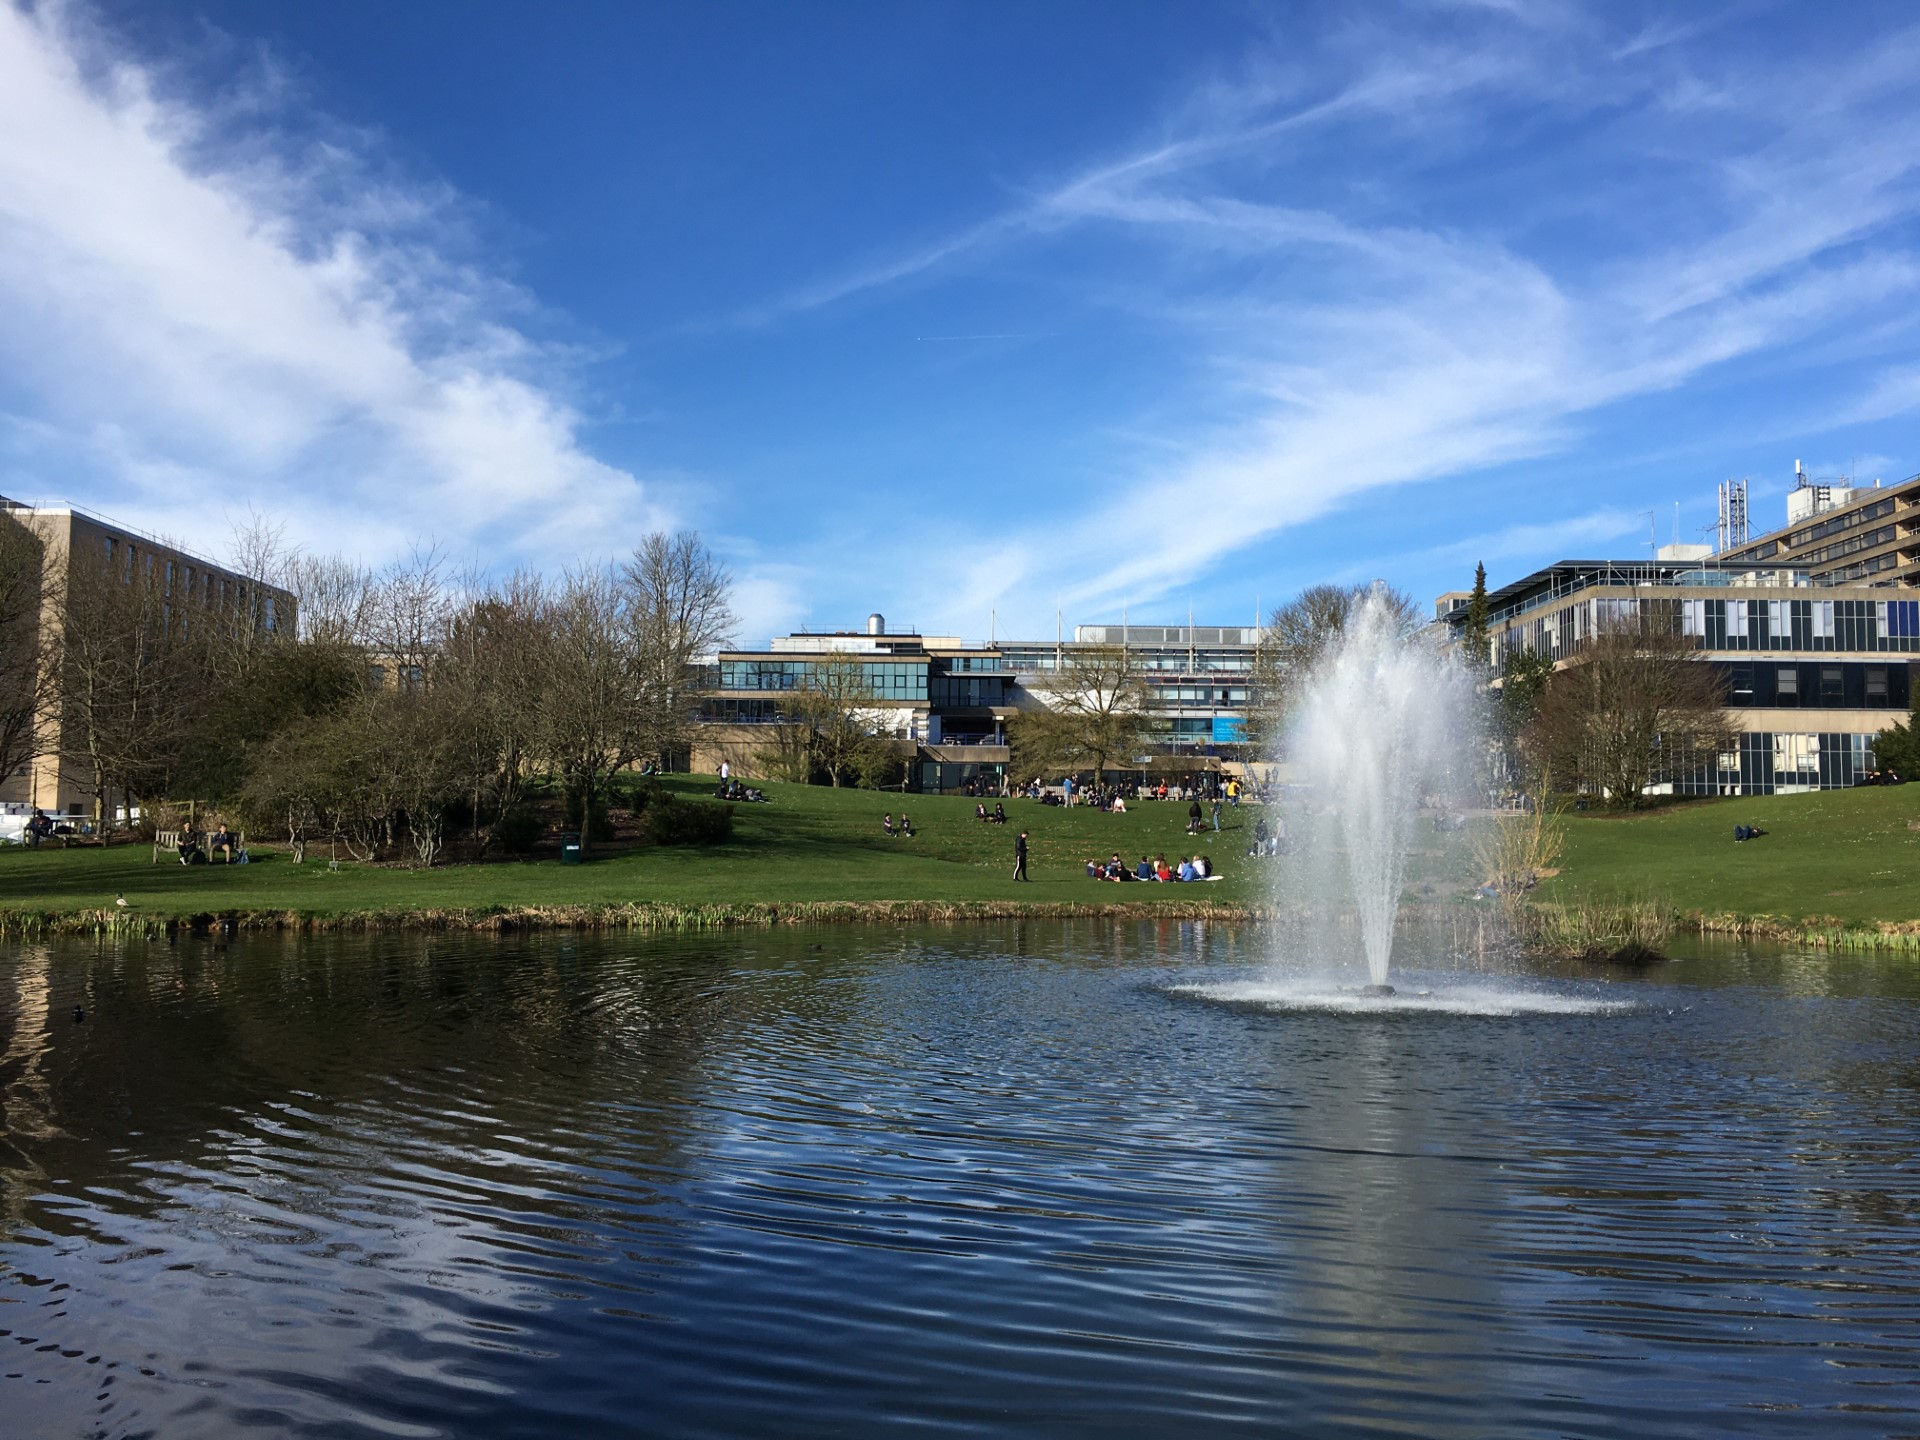 A shot of Bath's campus and the lake